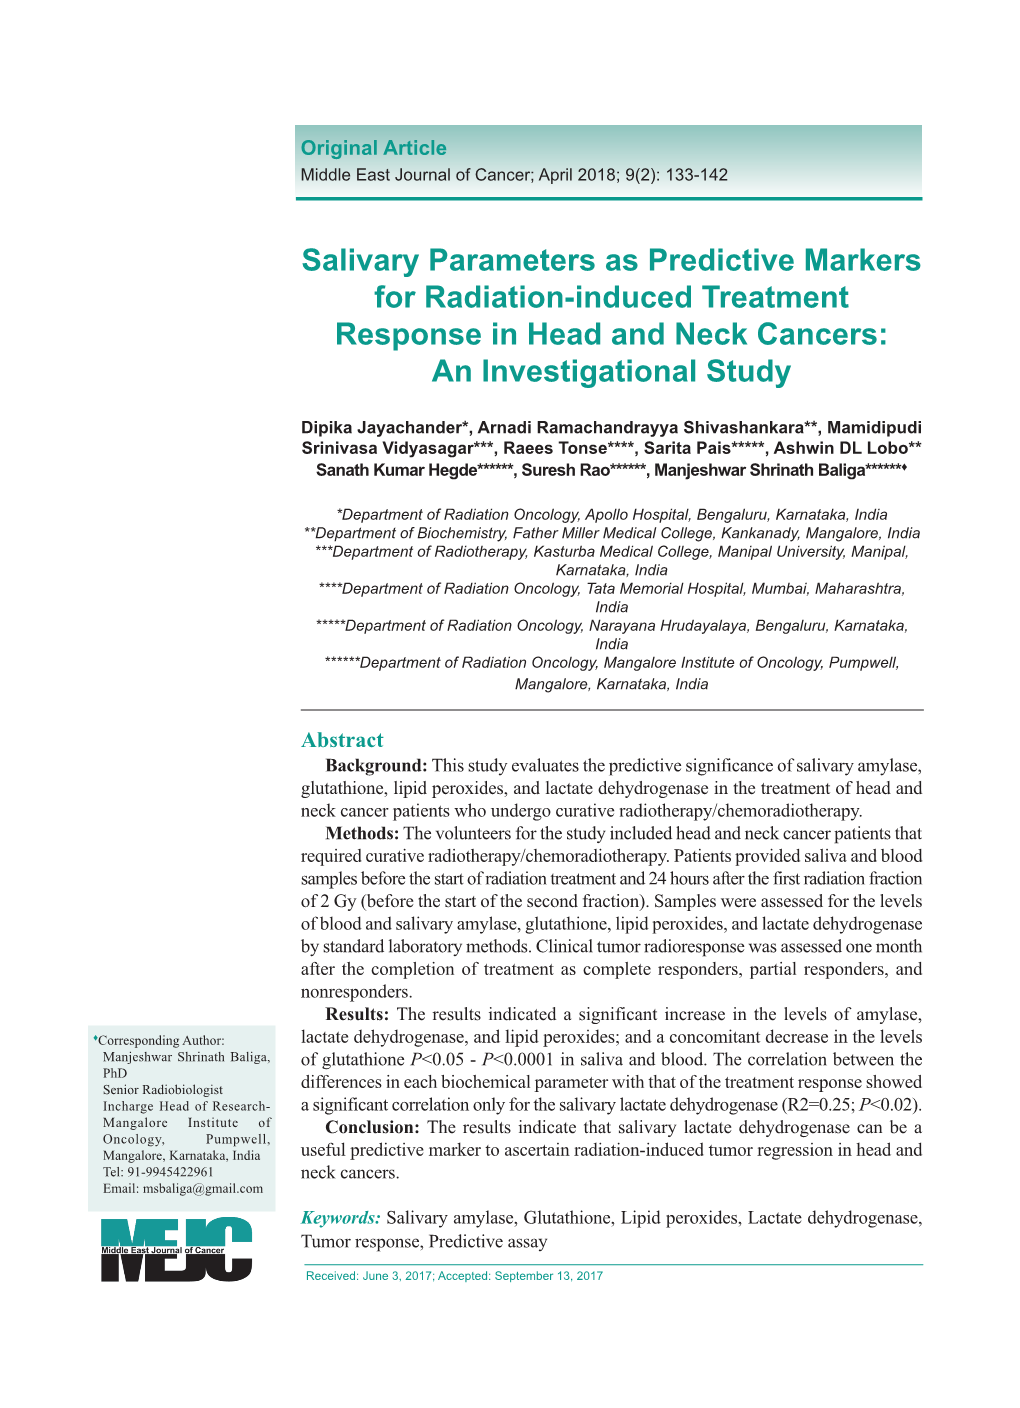 Salivary Parameters As Predictive Markers for Radiation-Induced Treatment Response in Head and Neck Cancers: an Investigational Study